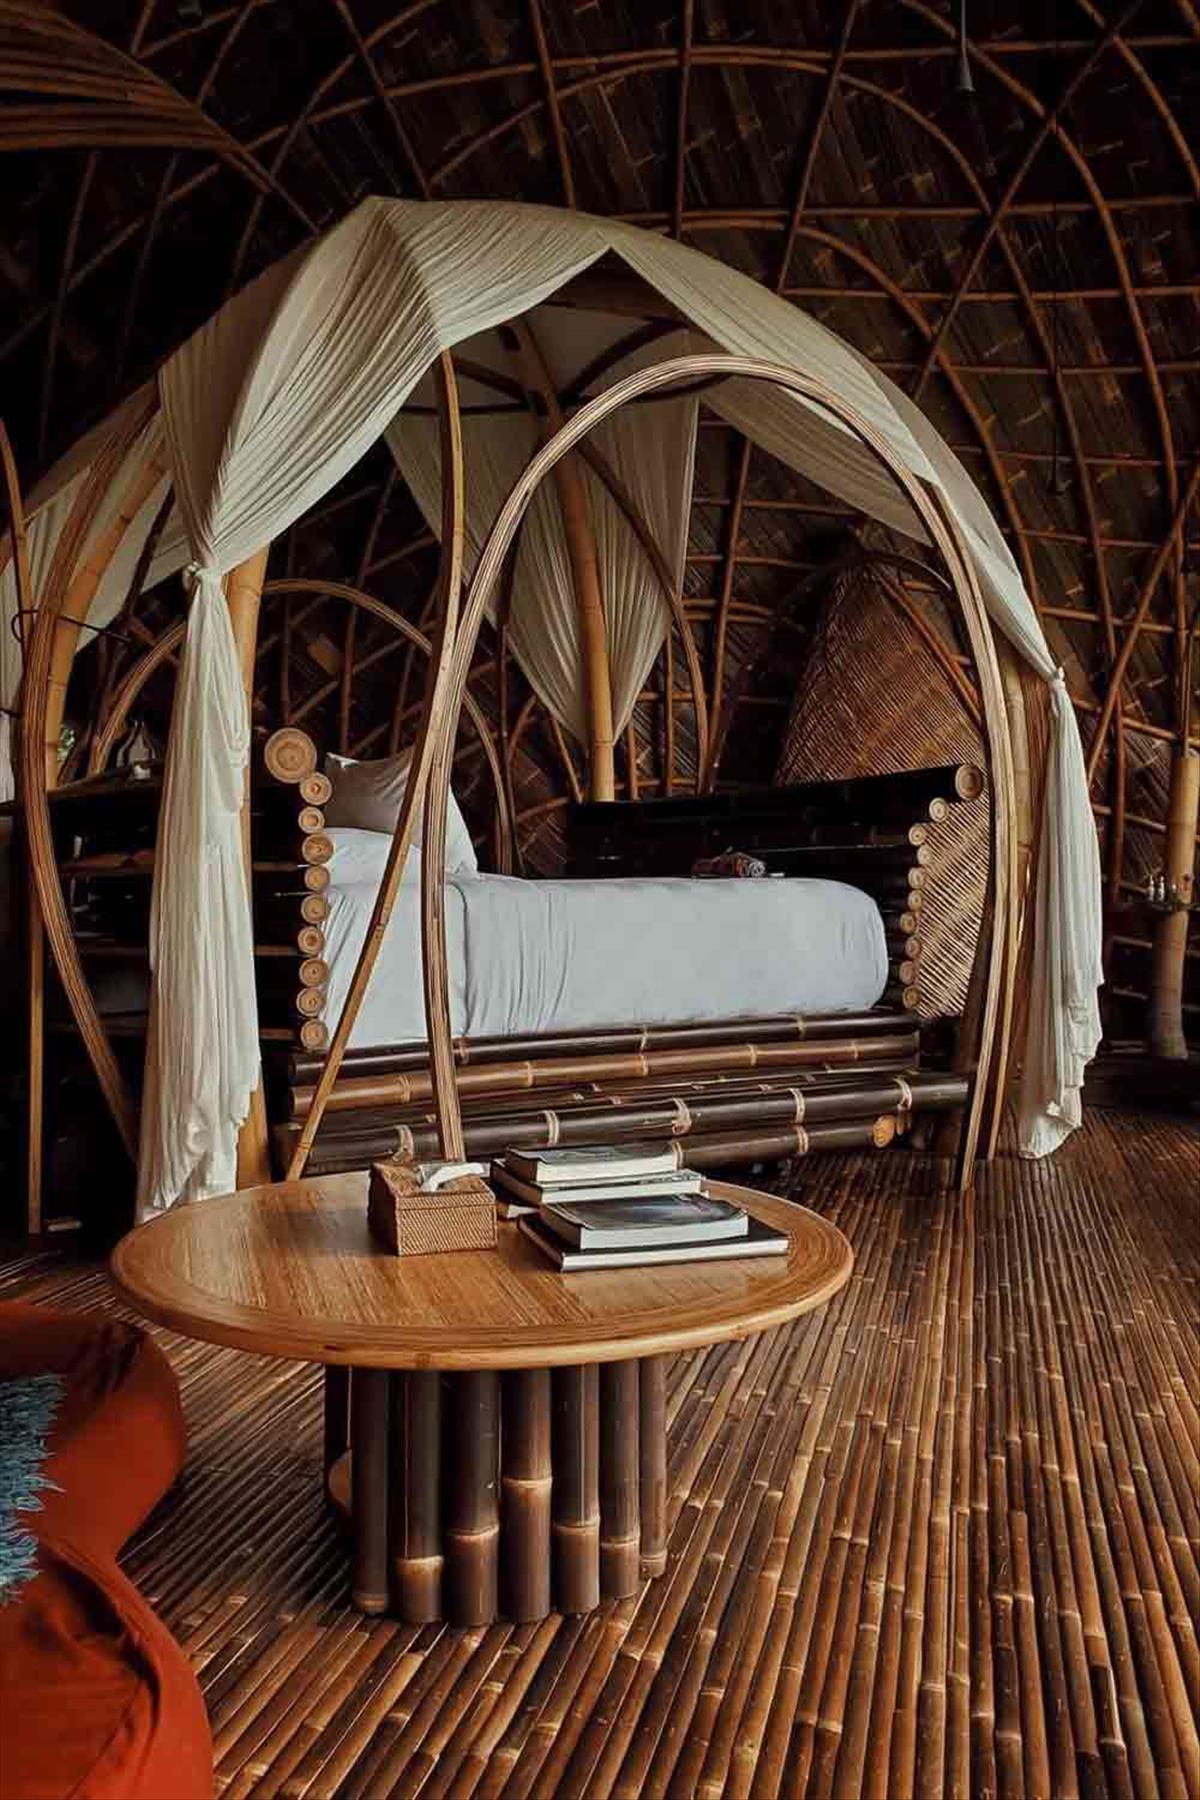 Creative Hanging Bed Designs Ideas ohfree.net